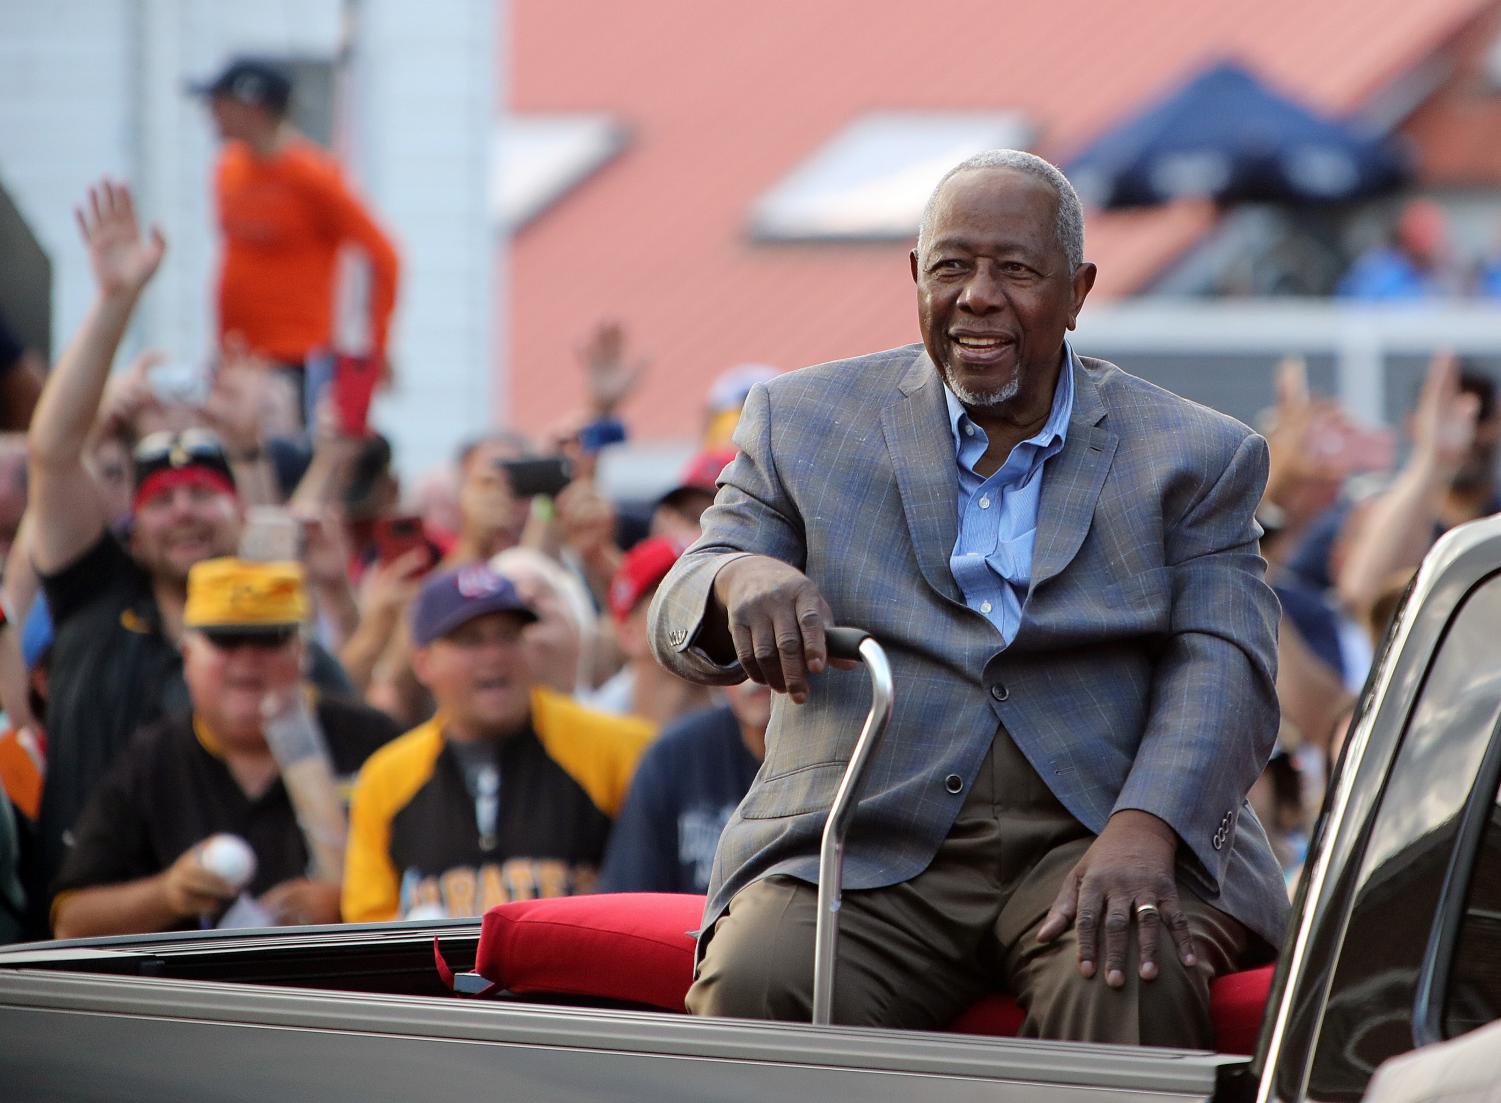 Remembering Hank Aaron, one of the greatest MLB players ever 